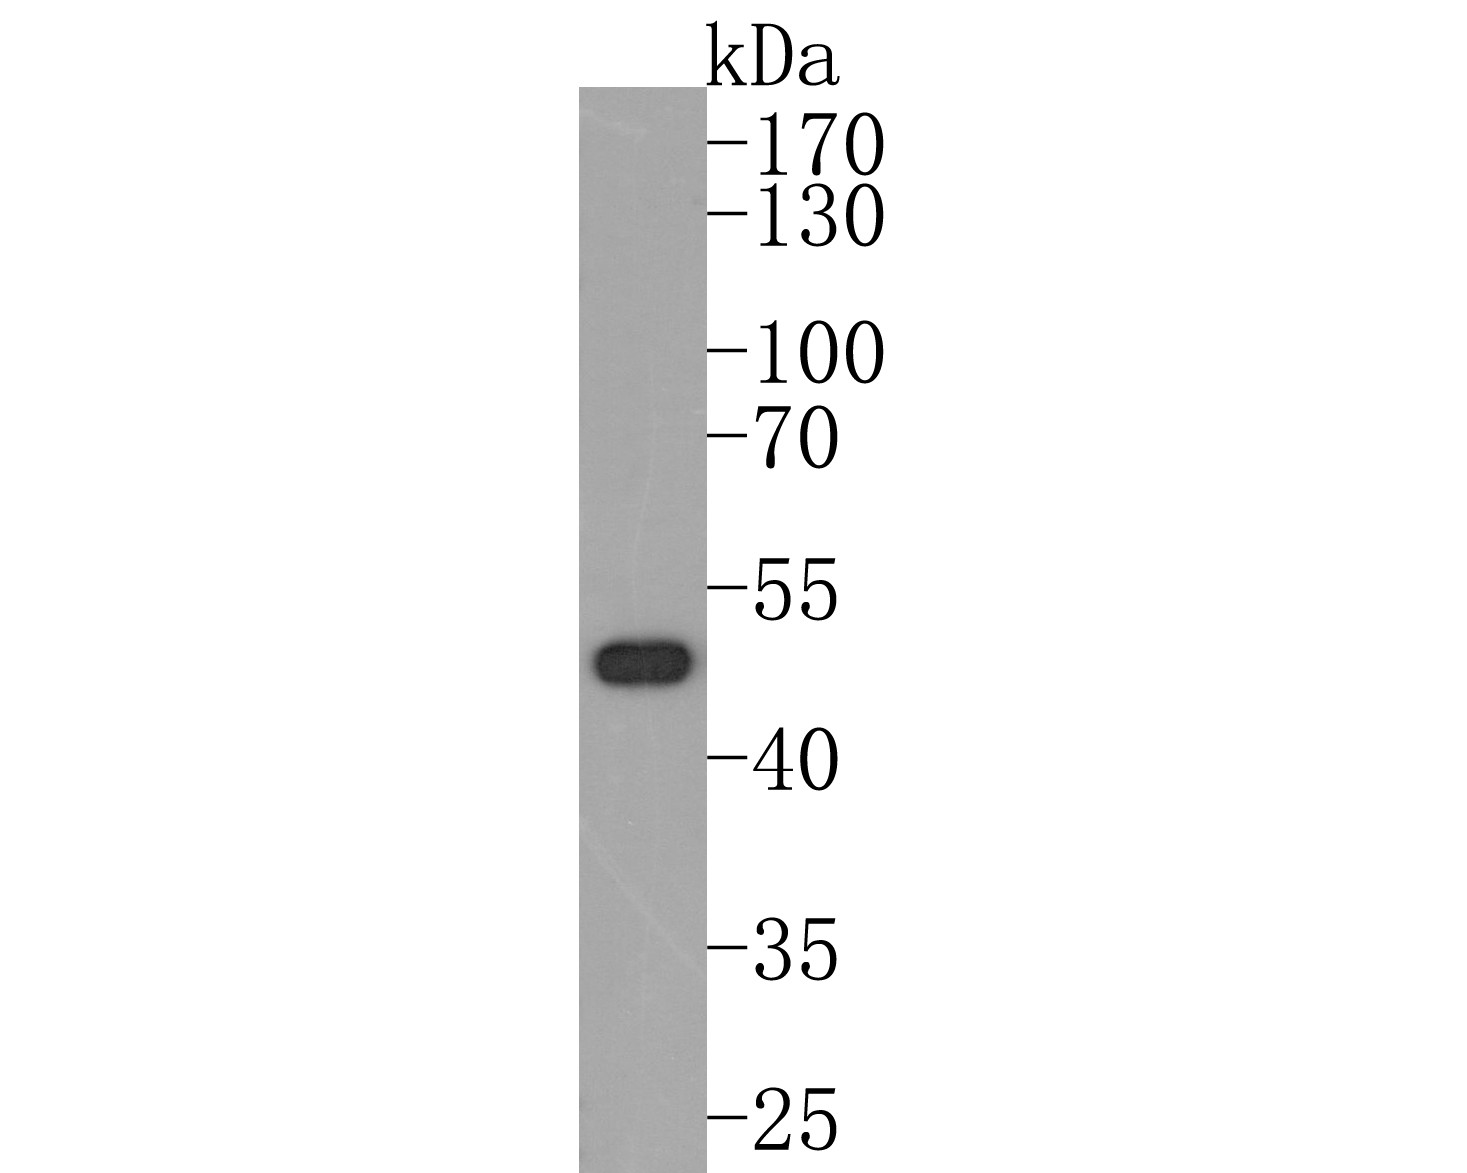 Western blot analysis of Nogo on Hela cell lysates. Proteins were transferred to a PVDF membrane and blocked with 5% BSA in PBS for 1 hour at room temperature. The primary antibody (ET1705-63, 1/500) was used in 5% BSA at room temperature for 2 hours. Goat Anti-Rabbit IgG - HRP Secondary Antibody (HA1001) at 1:200,000 dilution was used for 1 hour at room temperature.